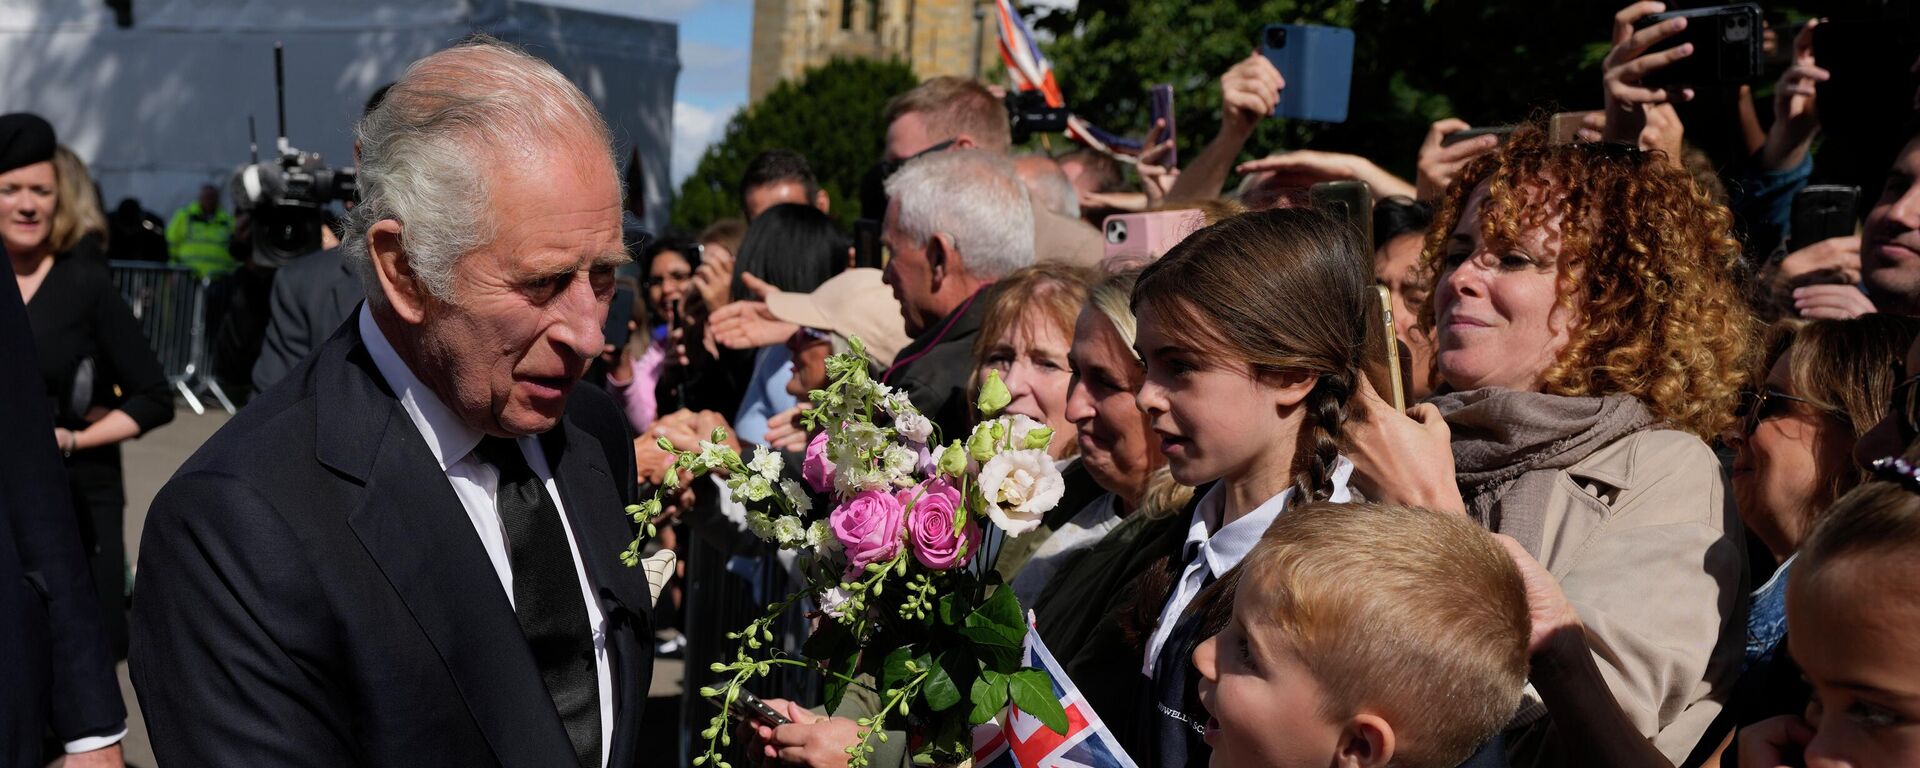 Britain's King Charles III shakes hands with a boy after a Service of Prayer and Reflection for the life of Queen Elizabeth II, at Llandaff Cathedral in Cardiff, Wales, Friday Sept. 16, 2022. The Royal couple has have arrived in Wales for an official visit. The royal couple previously visited to Scotland and Northern Ireland, the other nations making up the United Kingdom, following the death of Queen Elizabeth II at age 96 on Thursday, Sept. 8. (AP Photo/Frank Augstein, Pool) - Sputnik International, 1920, 21.09.2022